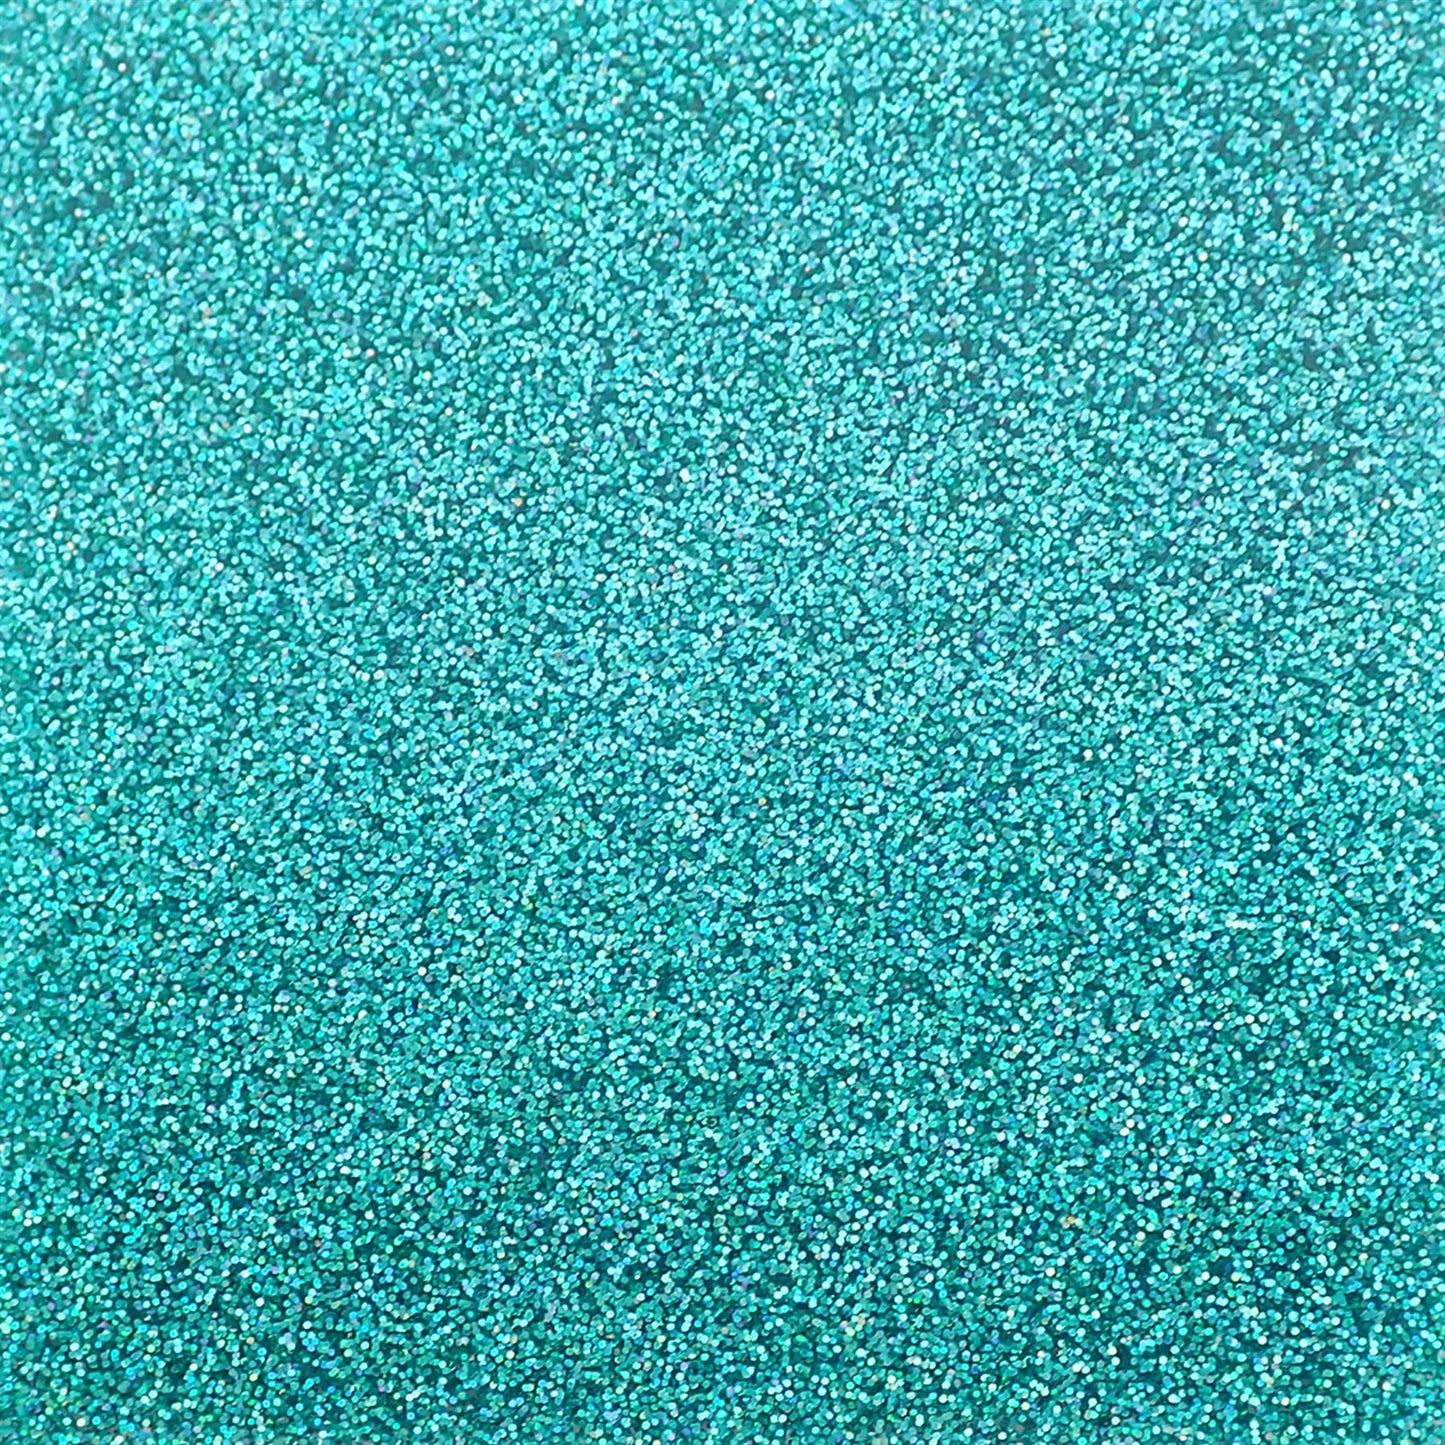 Incudo Emerald Green 2-Sided Holographic Glitter Acrylic Sheet - 300x200x3mm (11.8x7.87x0.12")